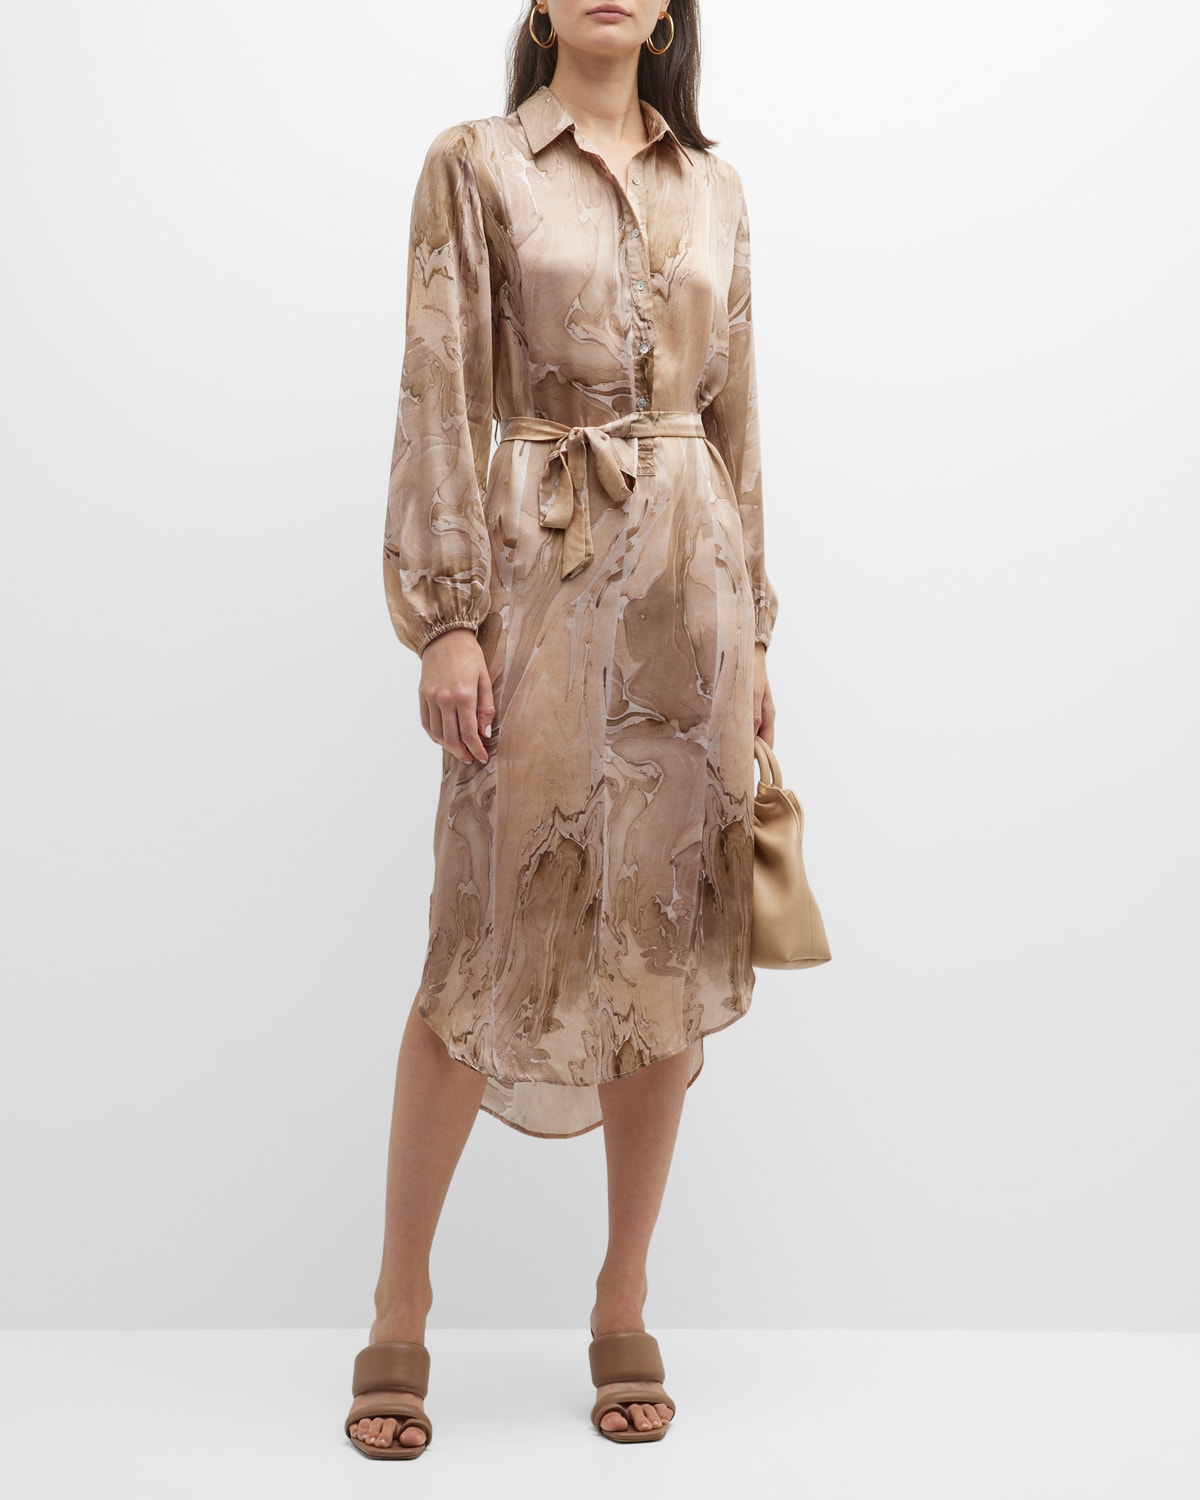 Cypress Belted Marble-Print Shirtdress